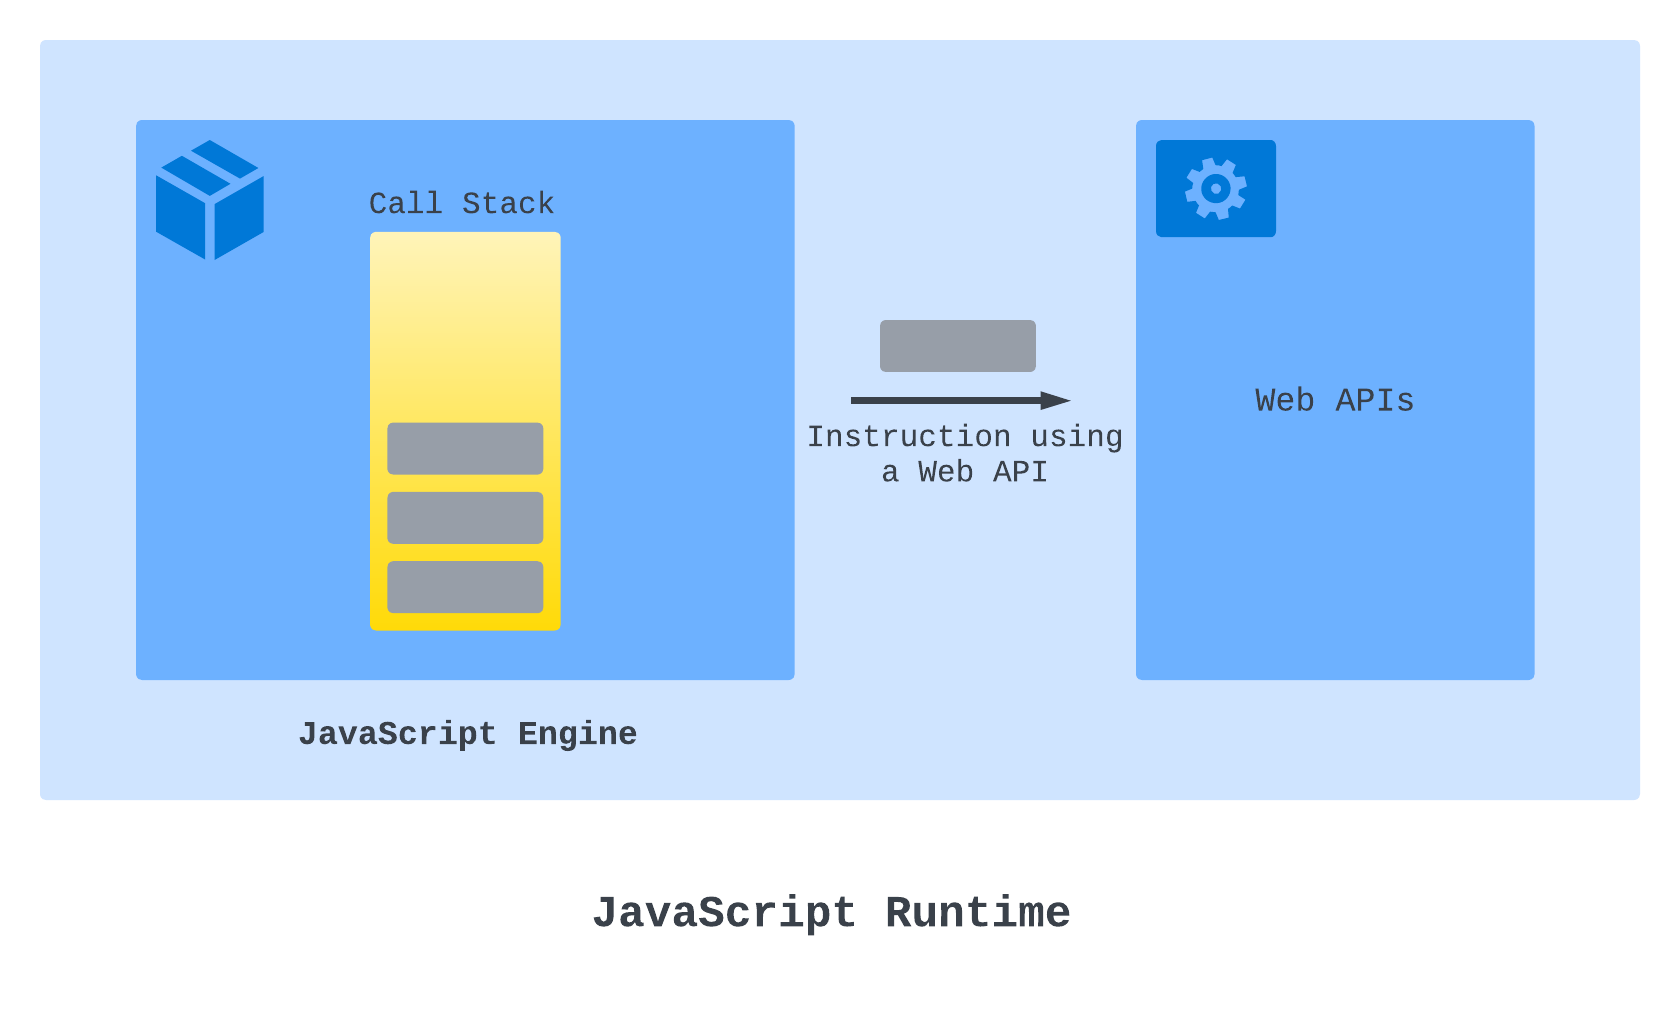 The JavaScript Engine interacting with the Web API